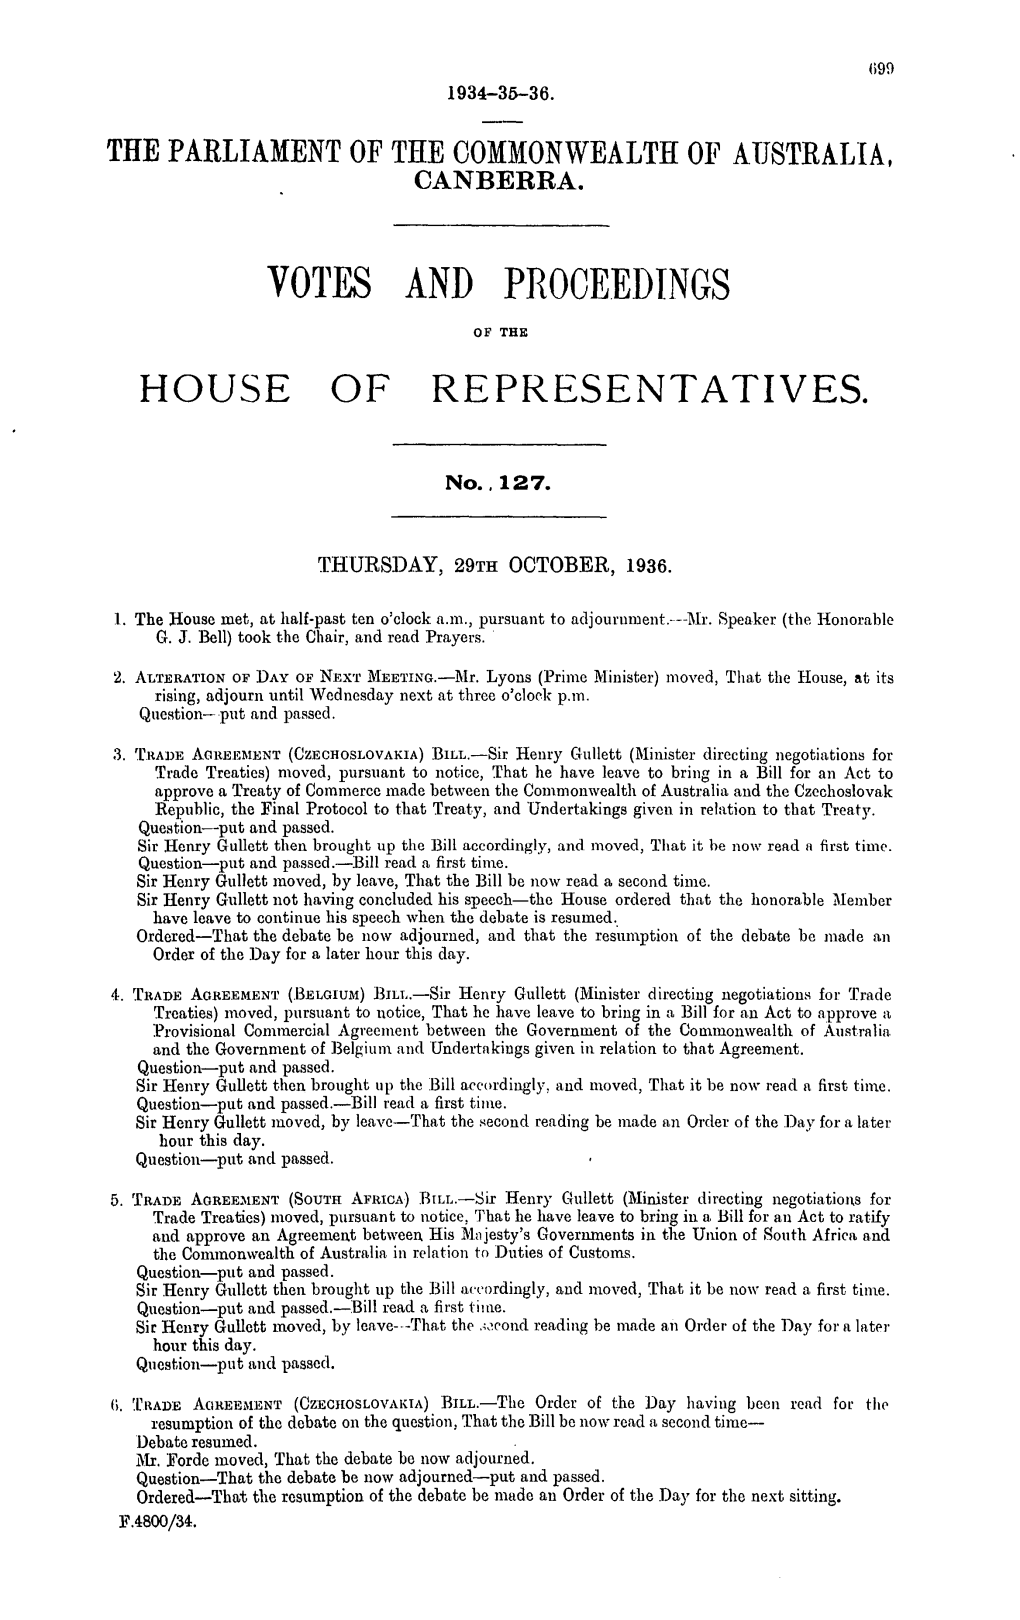 Votes and Proceedings House of Representatives